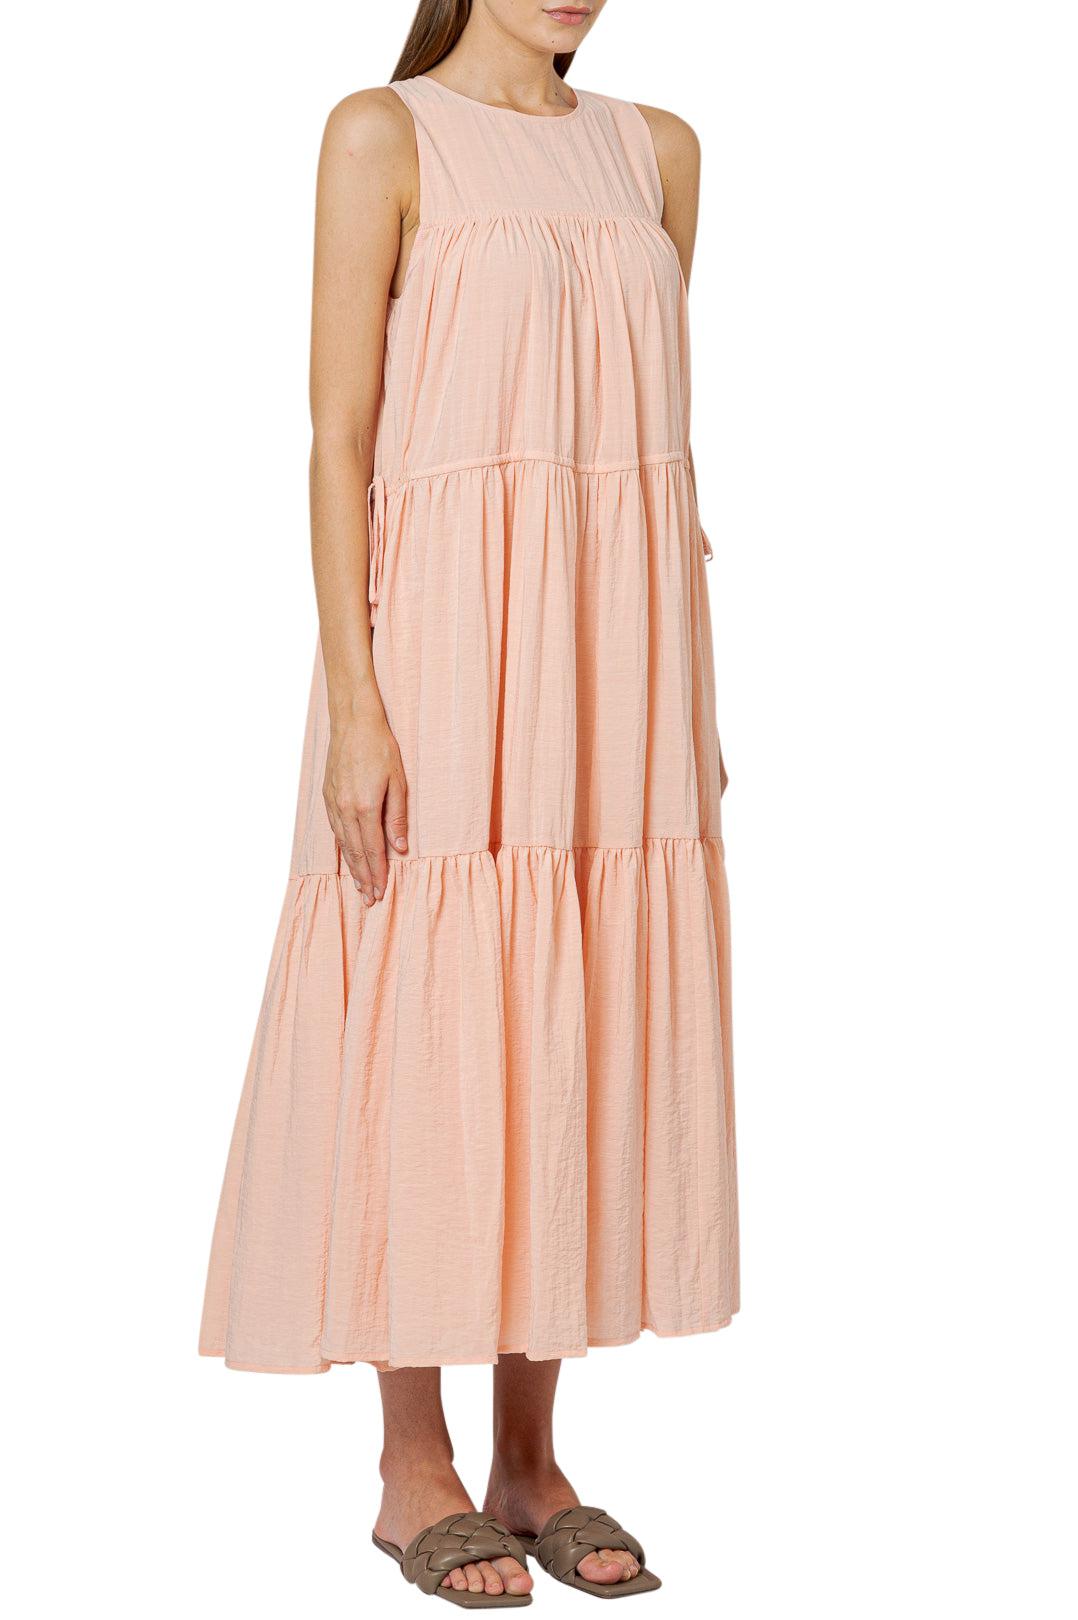 Missing You Already-Ruffled long dress-MYA21S-DR13-dgallerystore